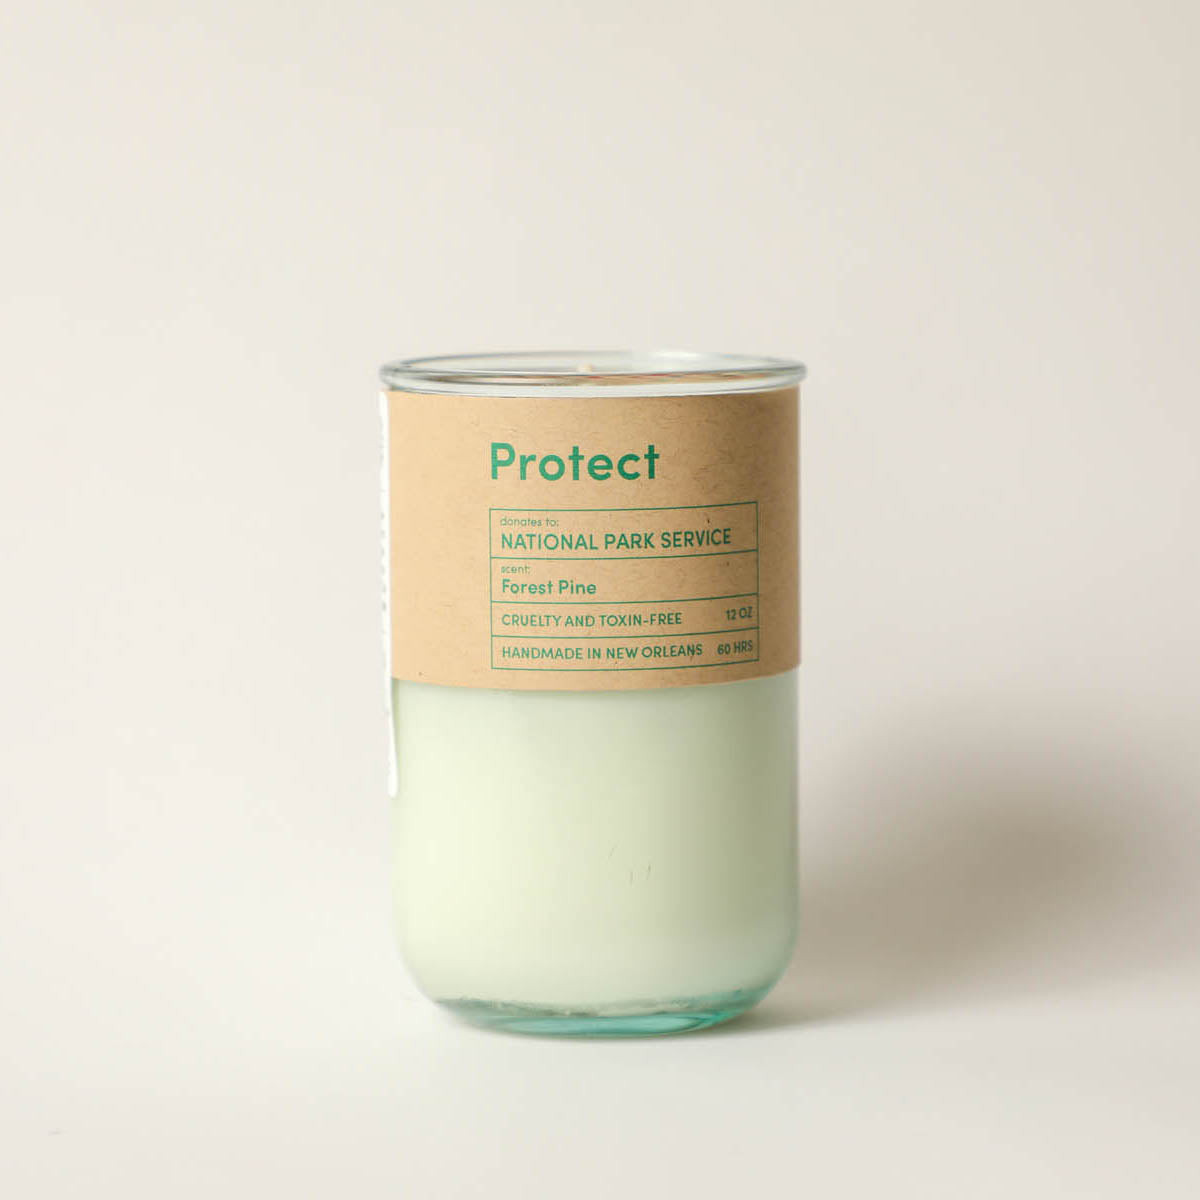 Protect / Forest Pine Scent: Candles for Good